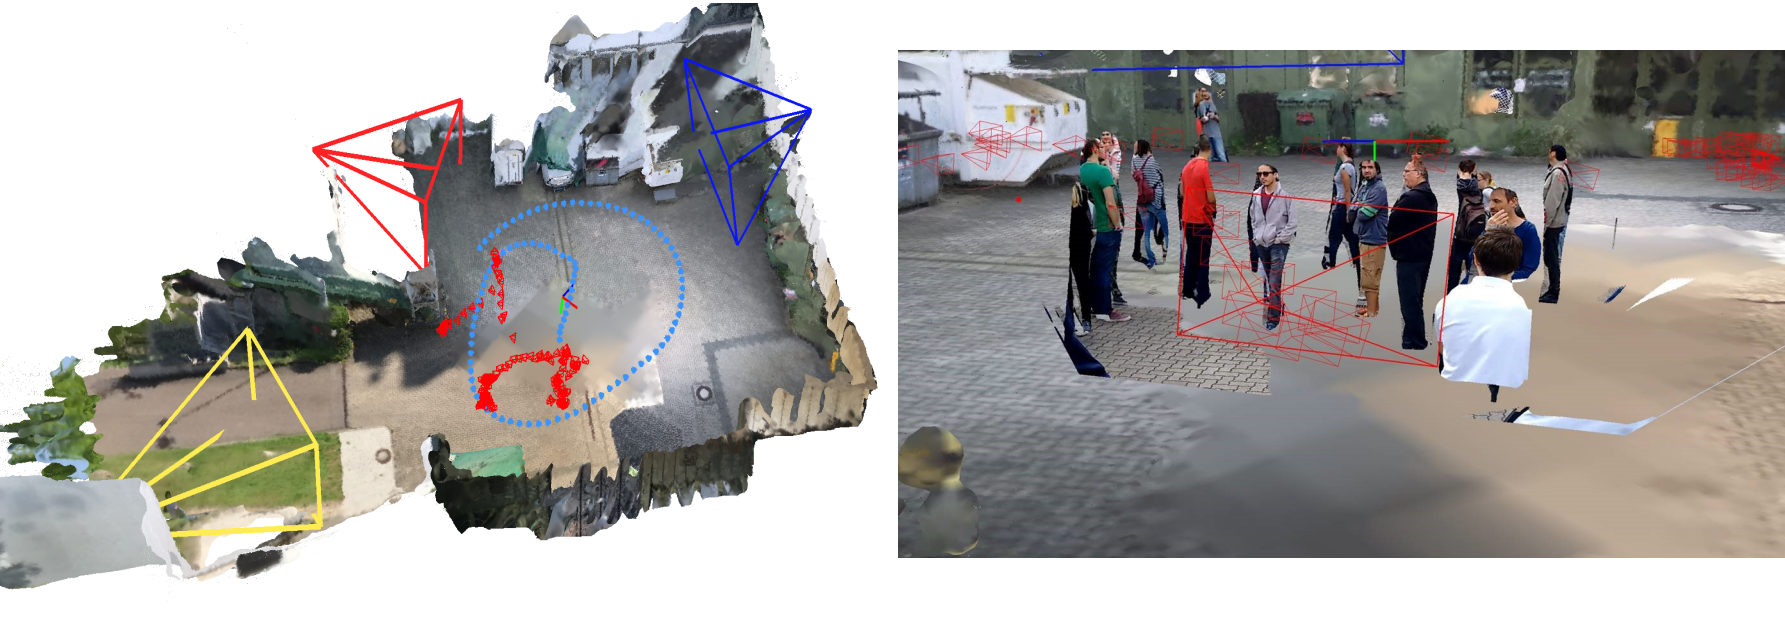 Computer Vision Meets Visual Analytics: Enabling 4D Crime Scene Investigation from Image and Video Data